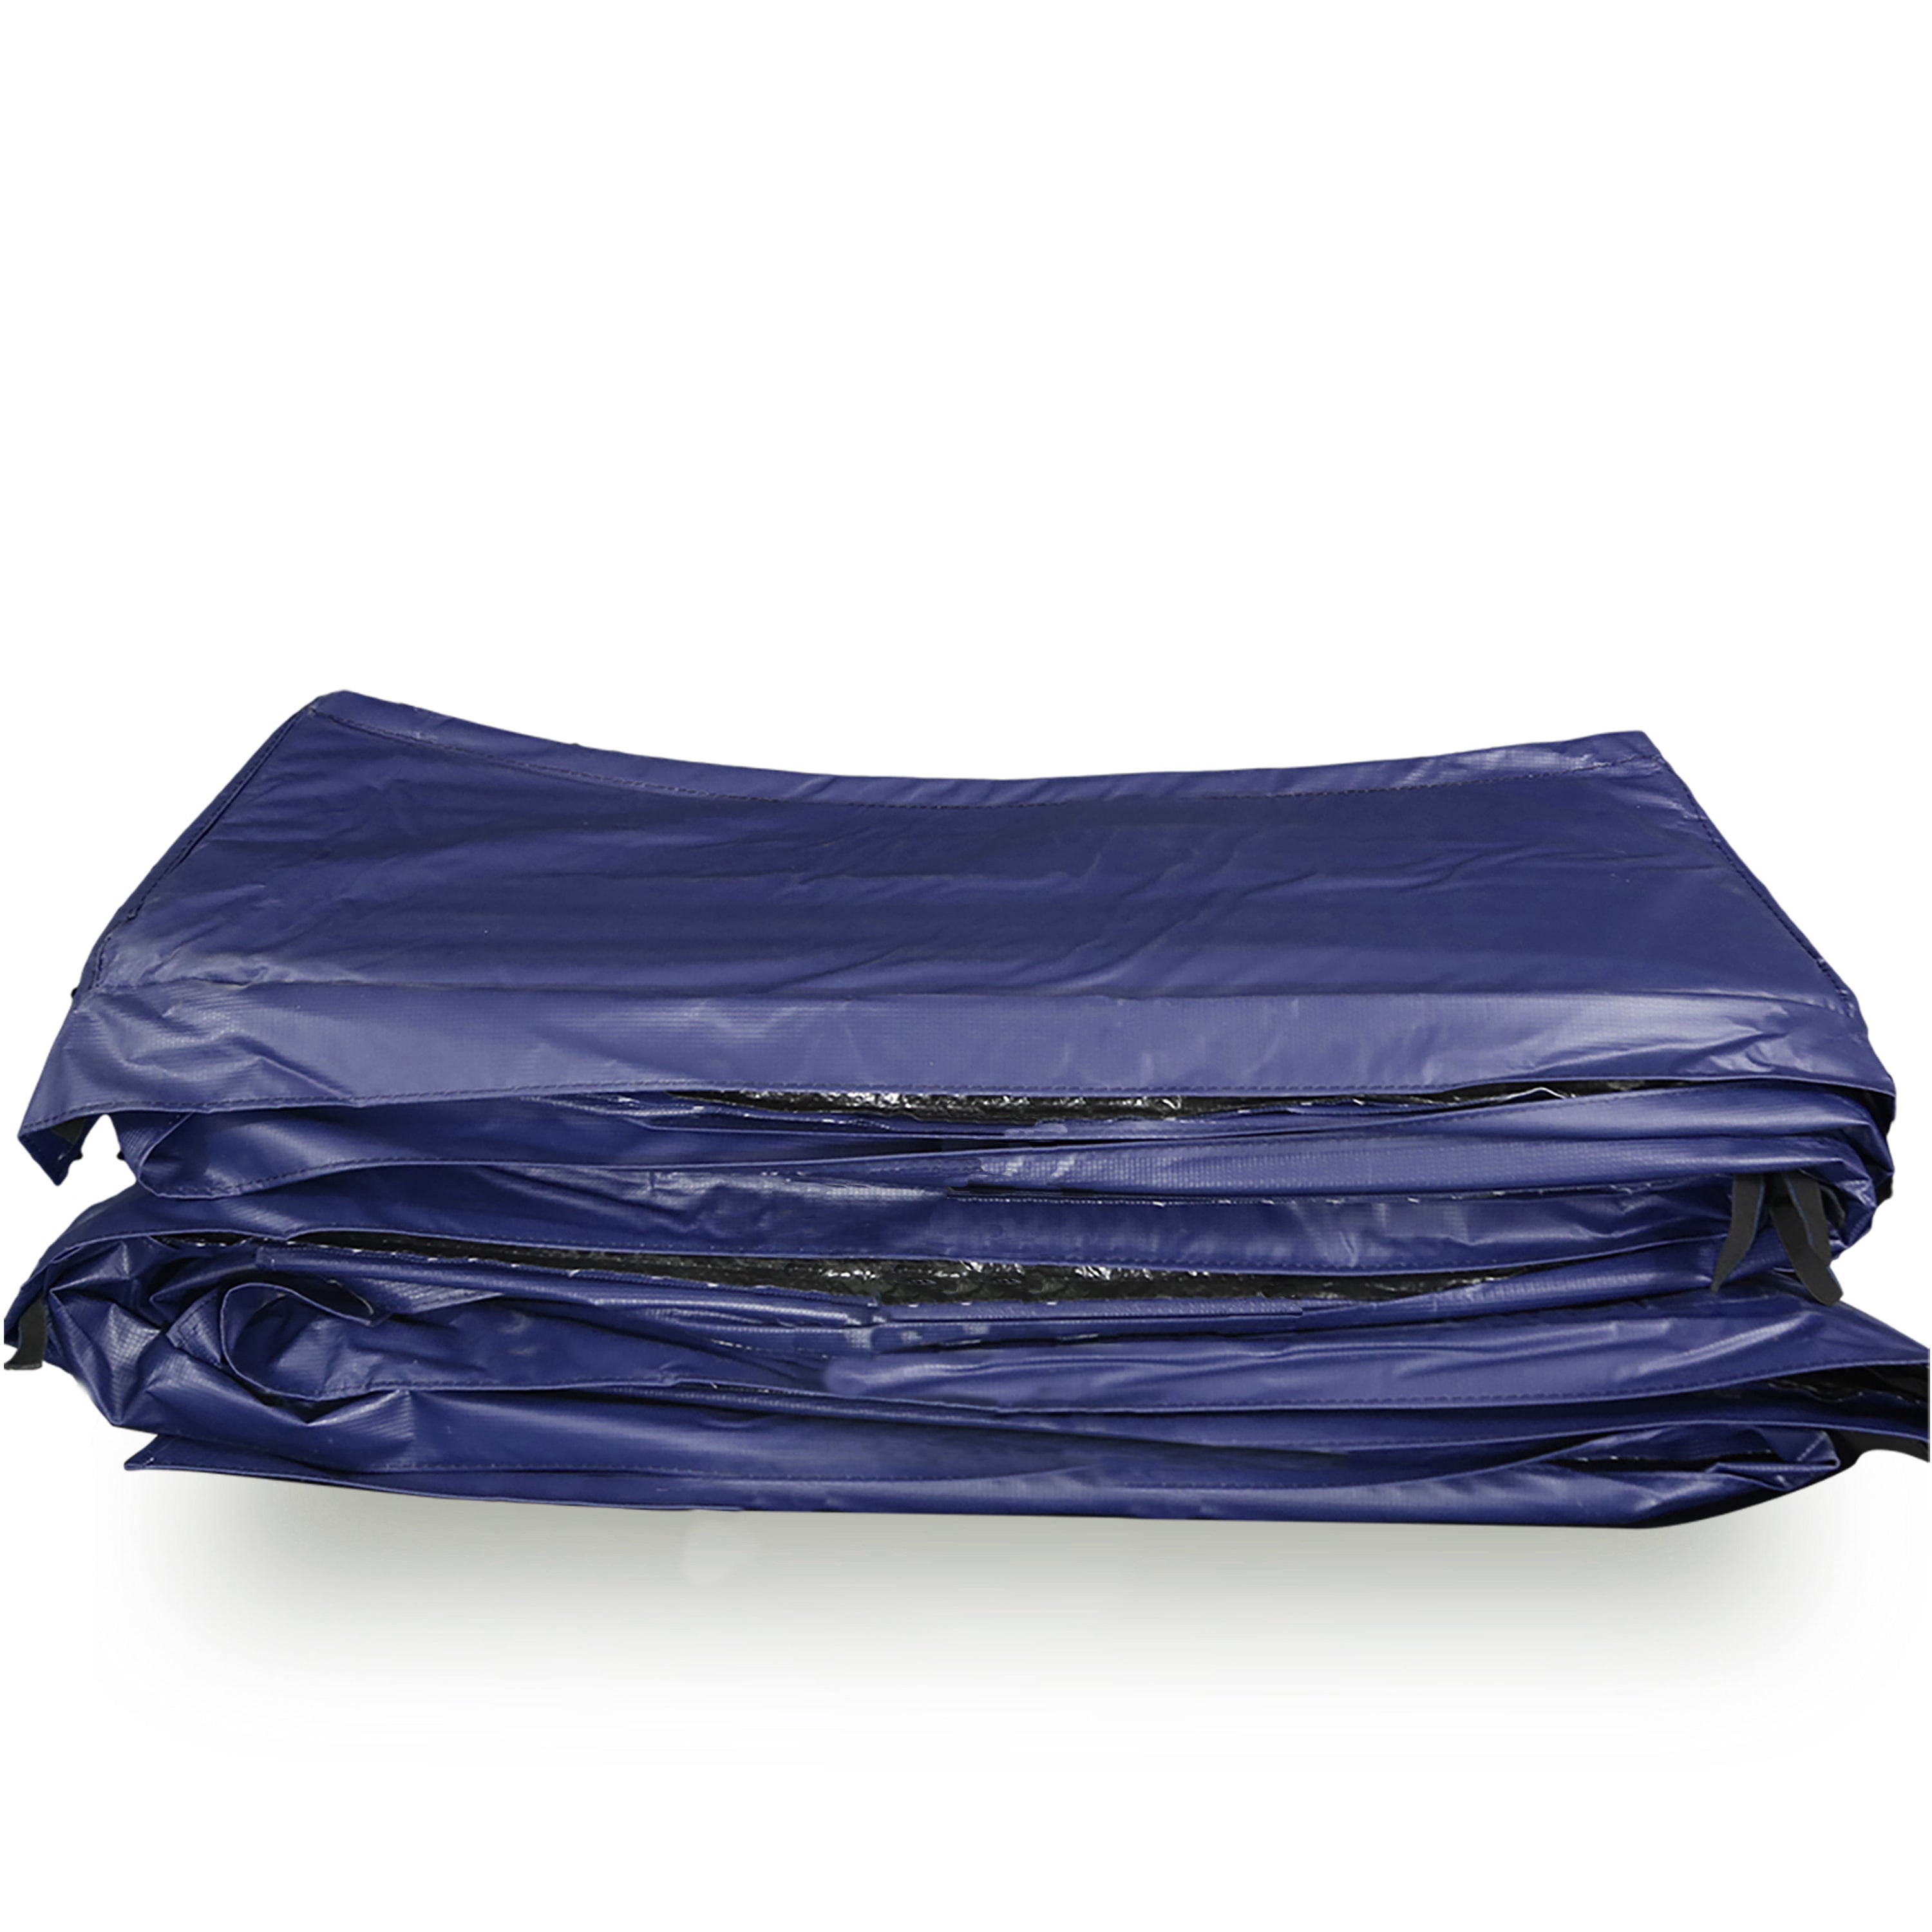 Navy-colored spring pad folded into a neat pile. 